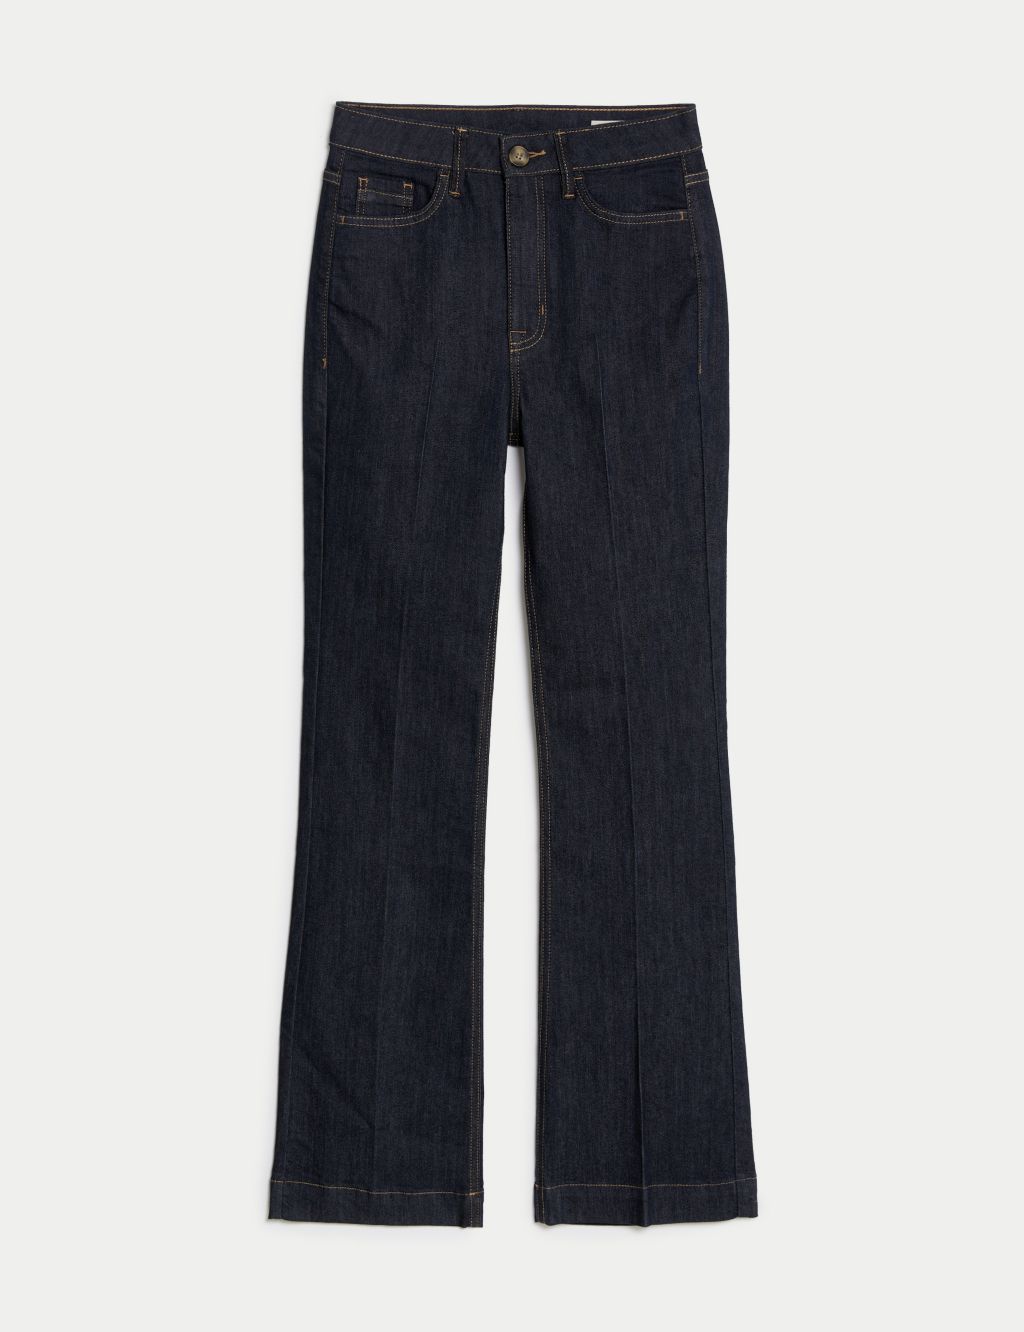 High Waisted Crease Front Flared Jeans image 2